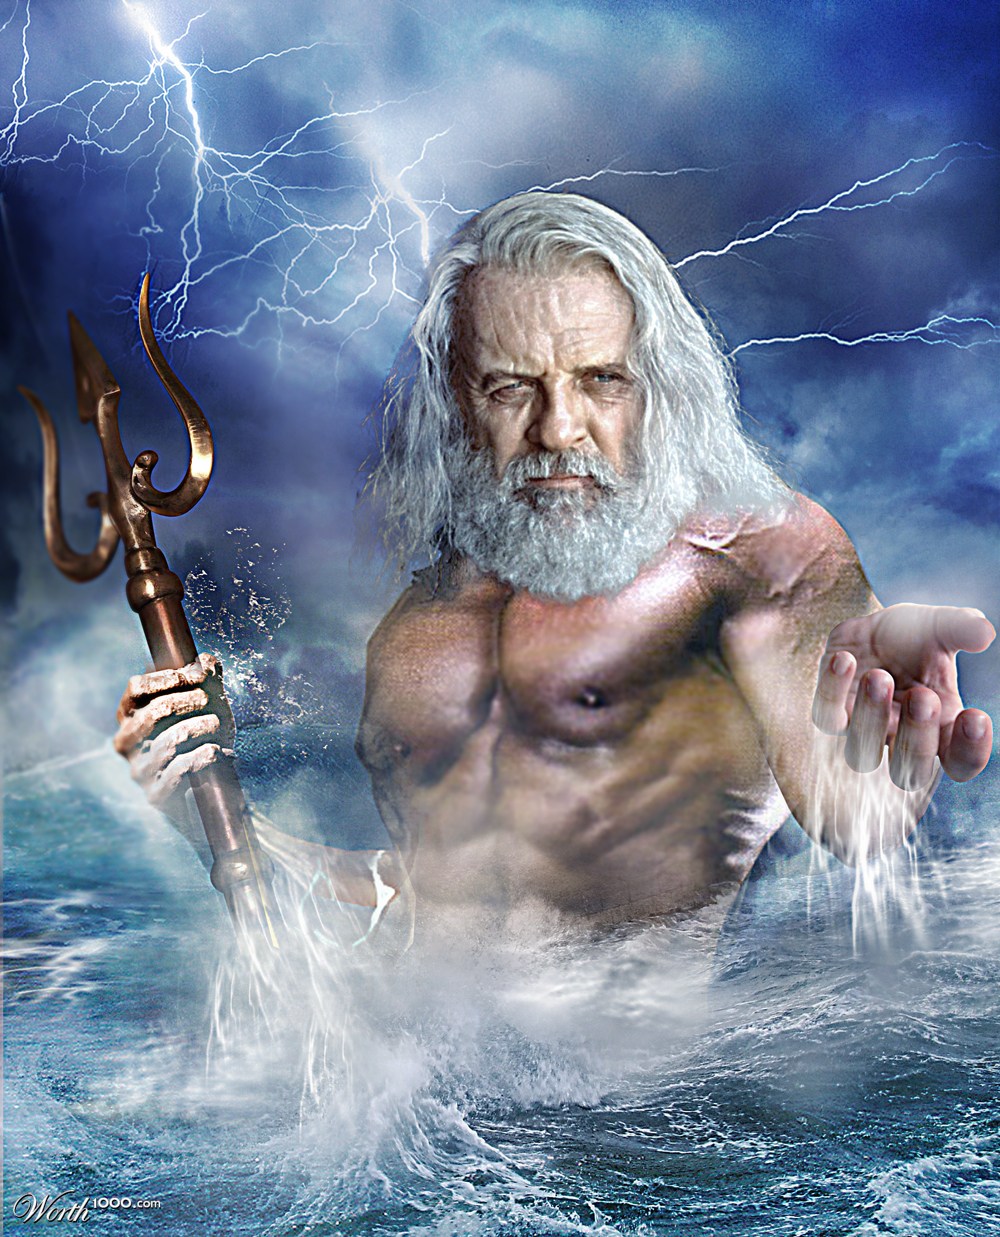 What is the difference between Neptune vs. Poseidon?